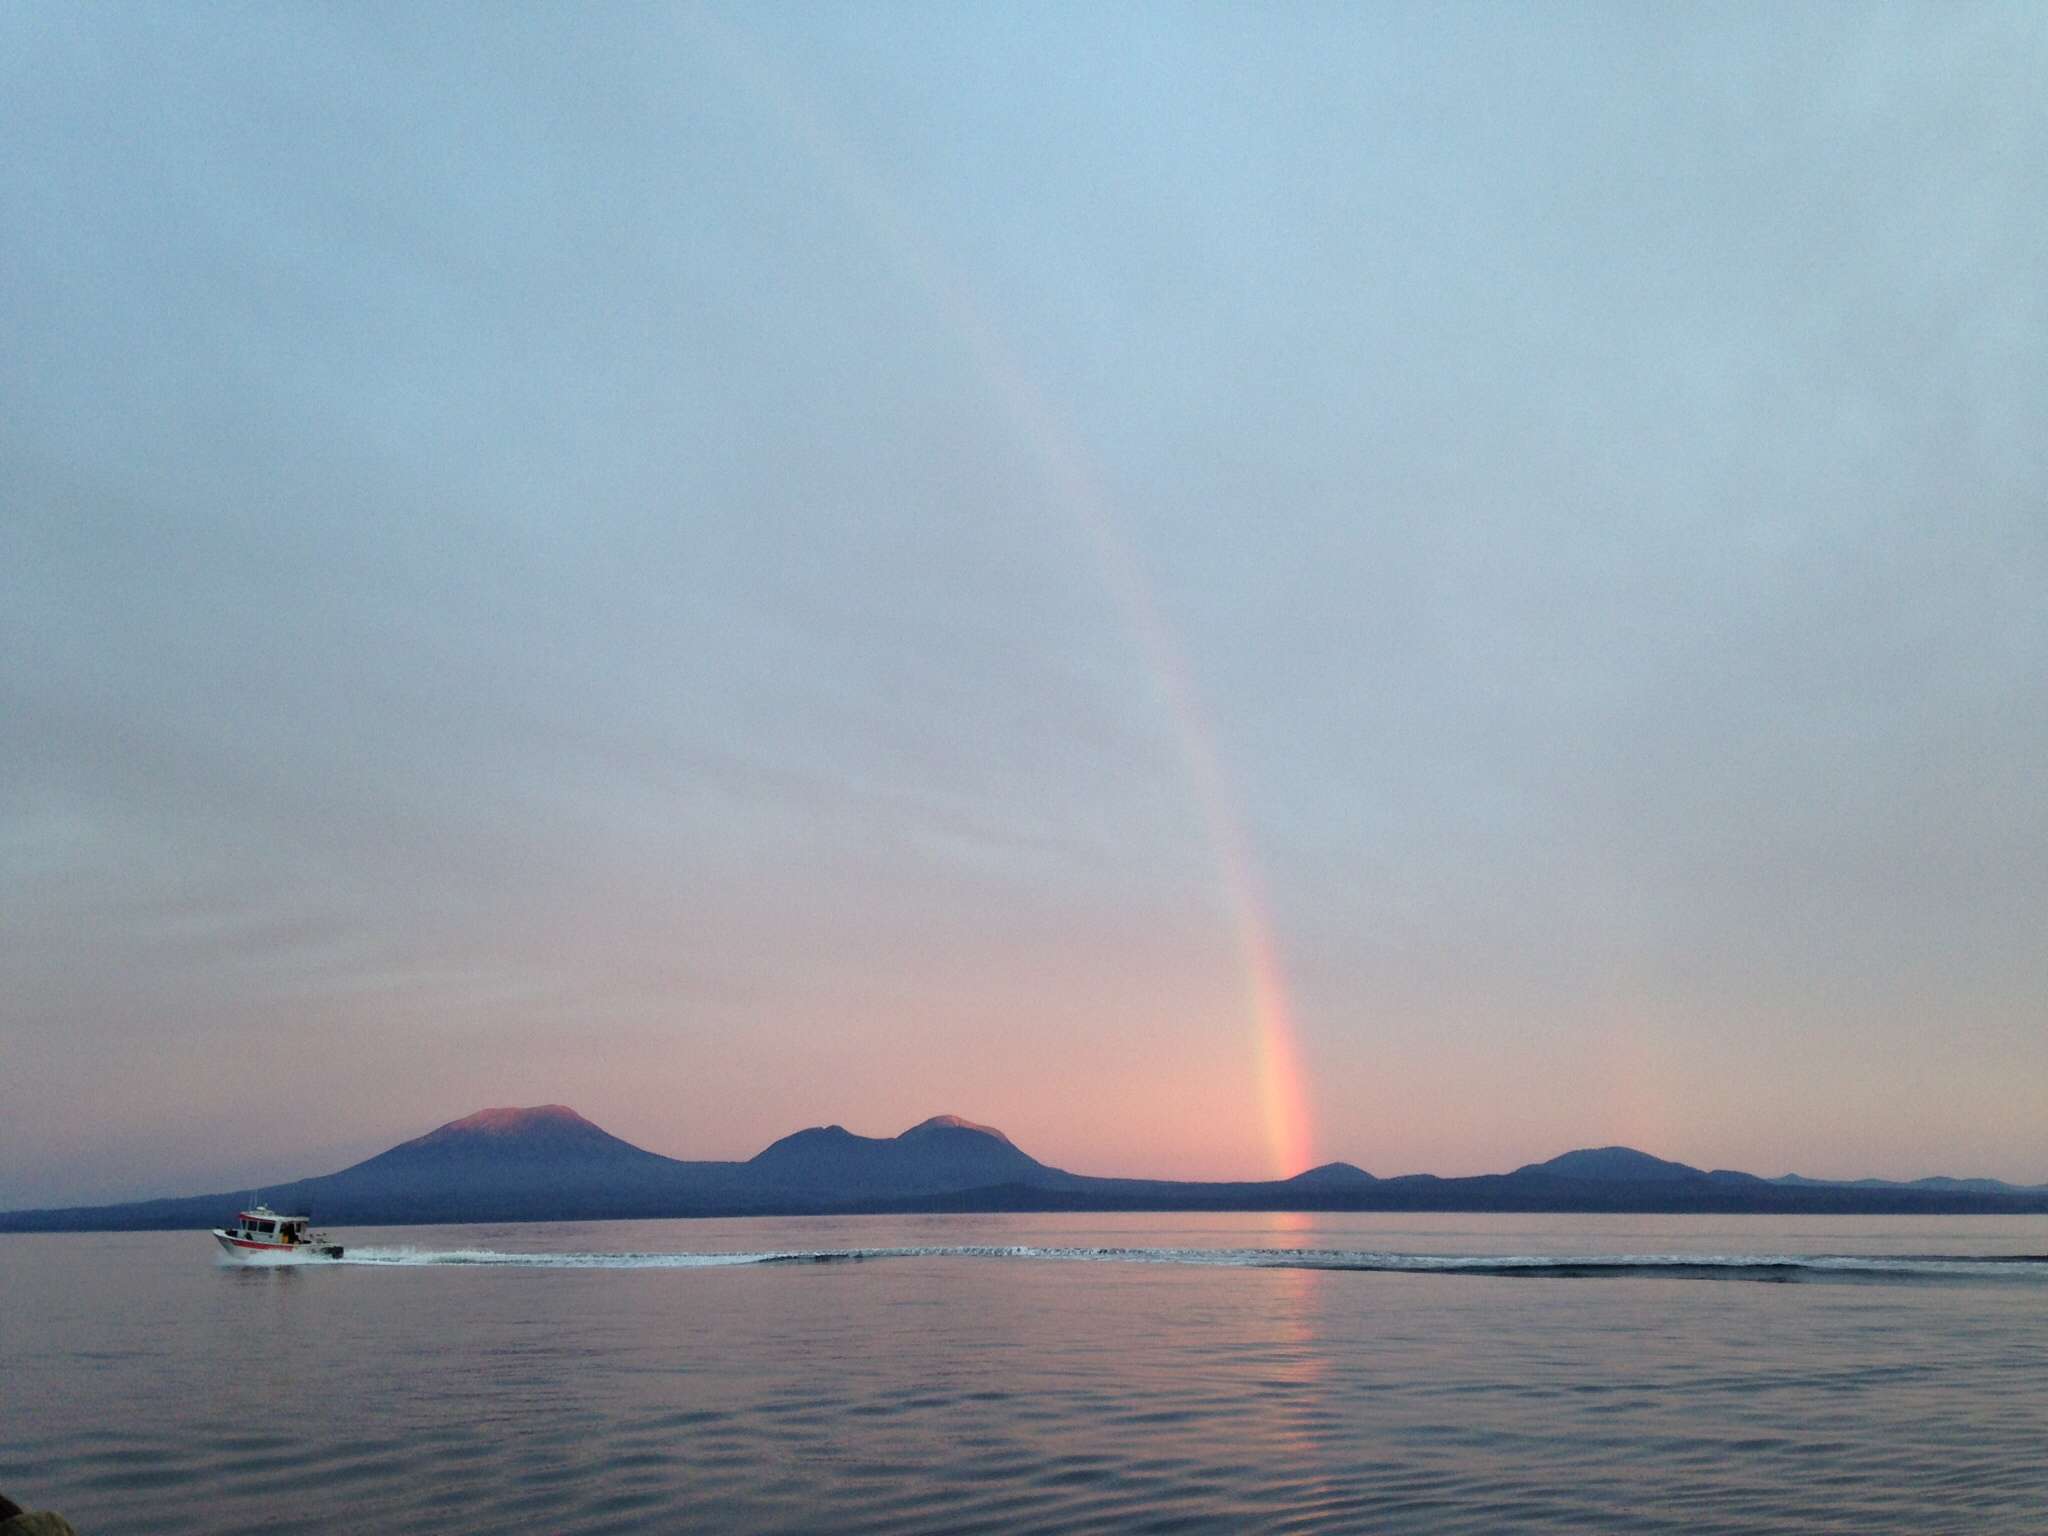 Morning rainbow over Mt. Edgecumbe (a dormant volcano located at the southern end of the Kruzof Island near Sitka, AK).